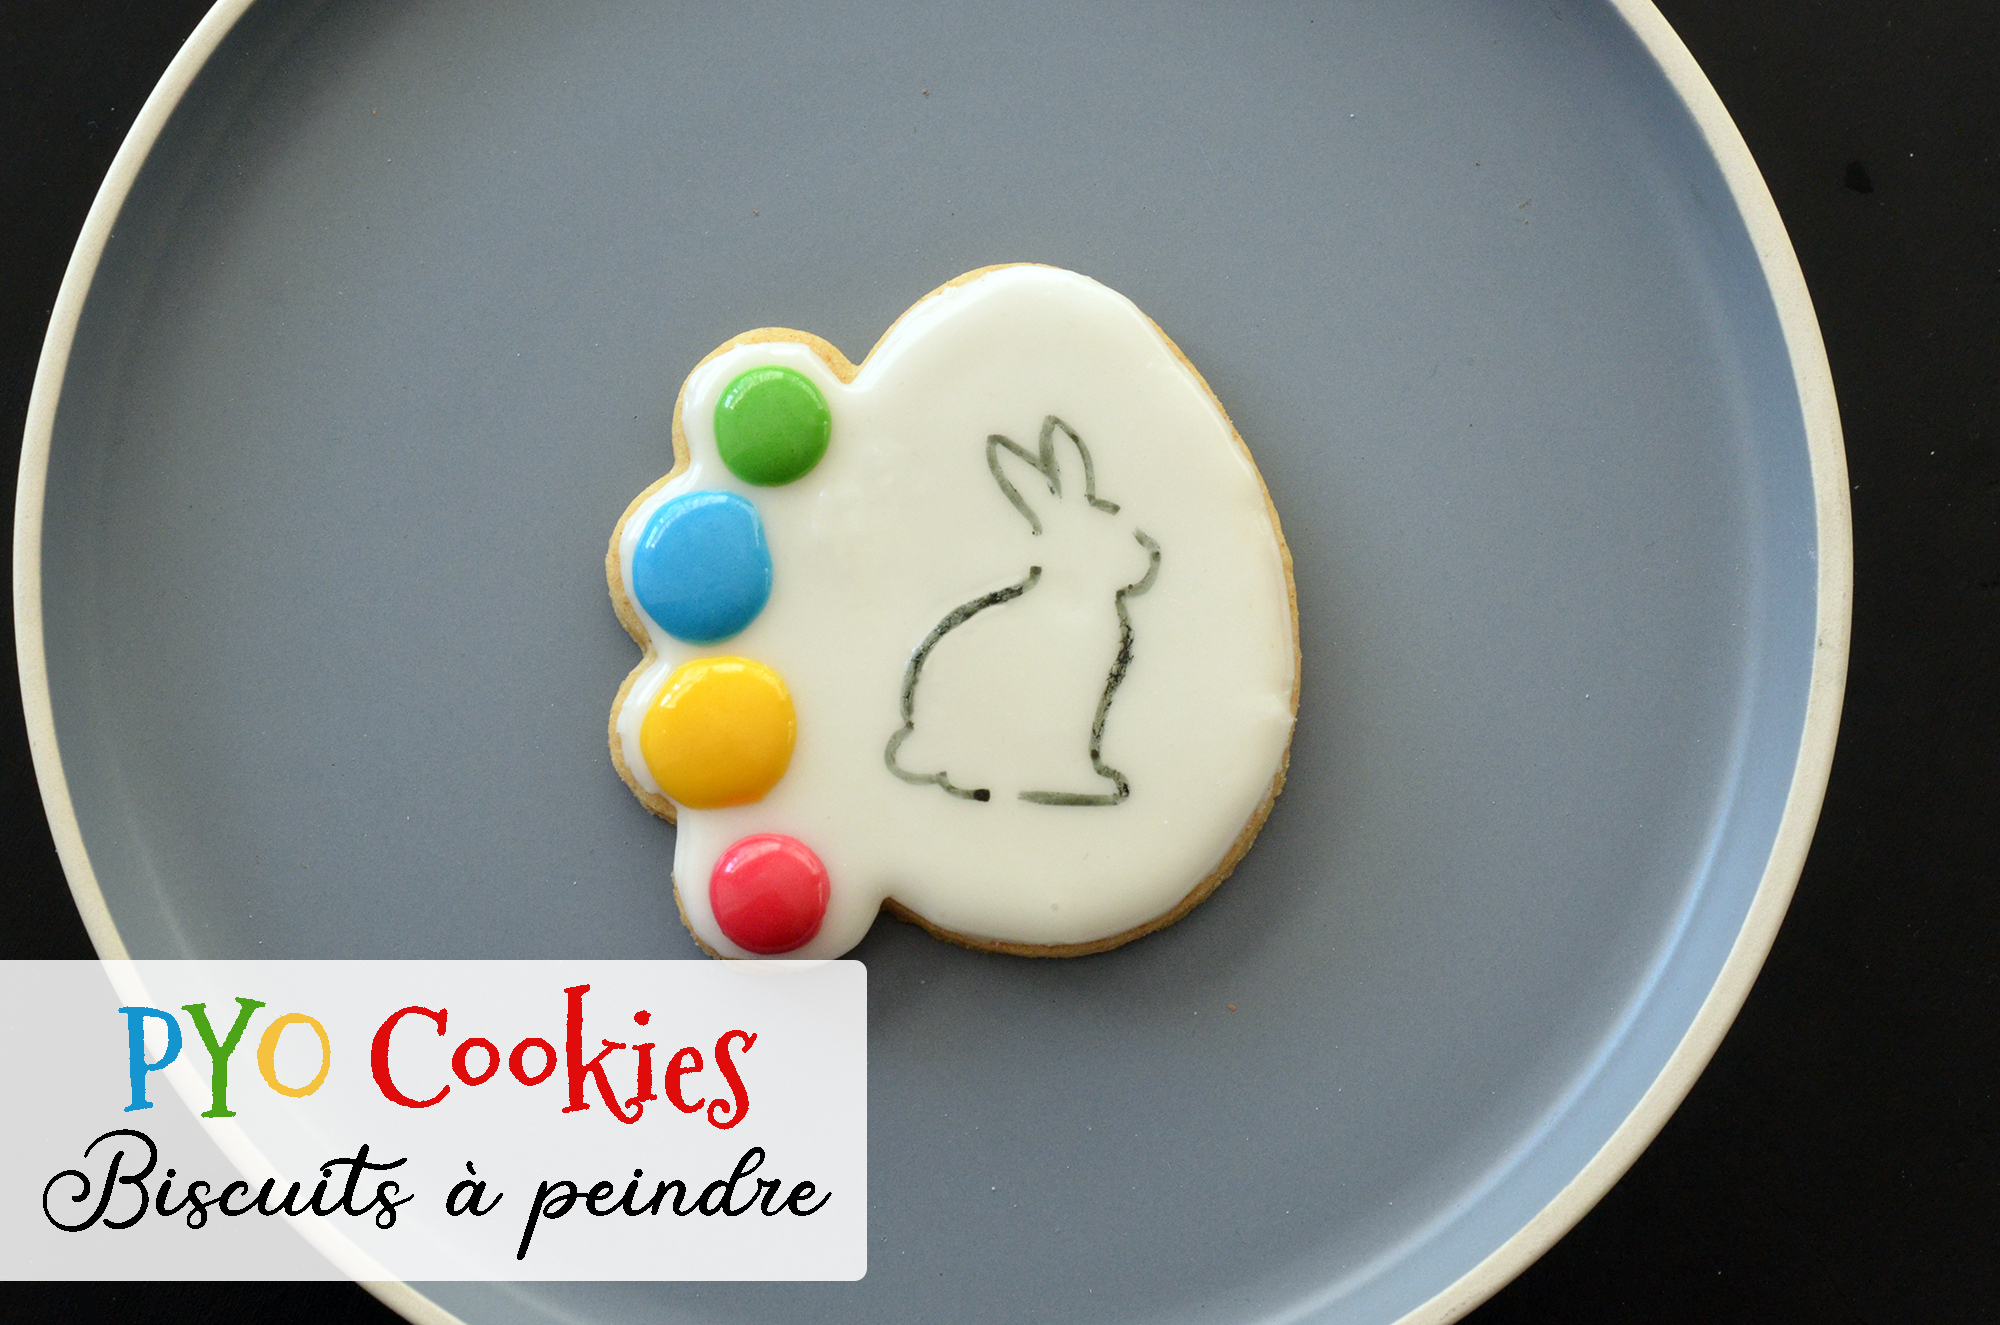 PYO Cookies - Biscuits à peindre - Paint Your Own Cookie